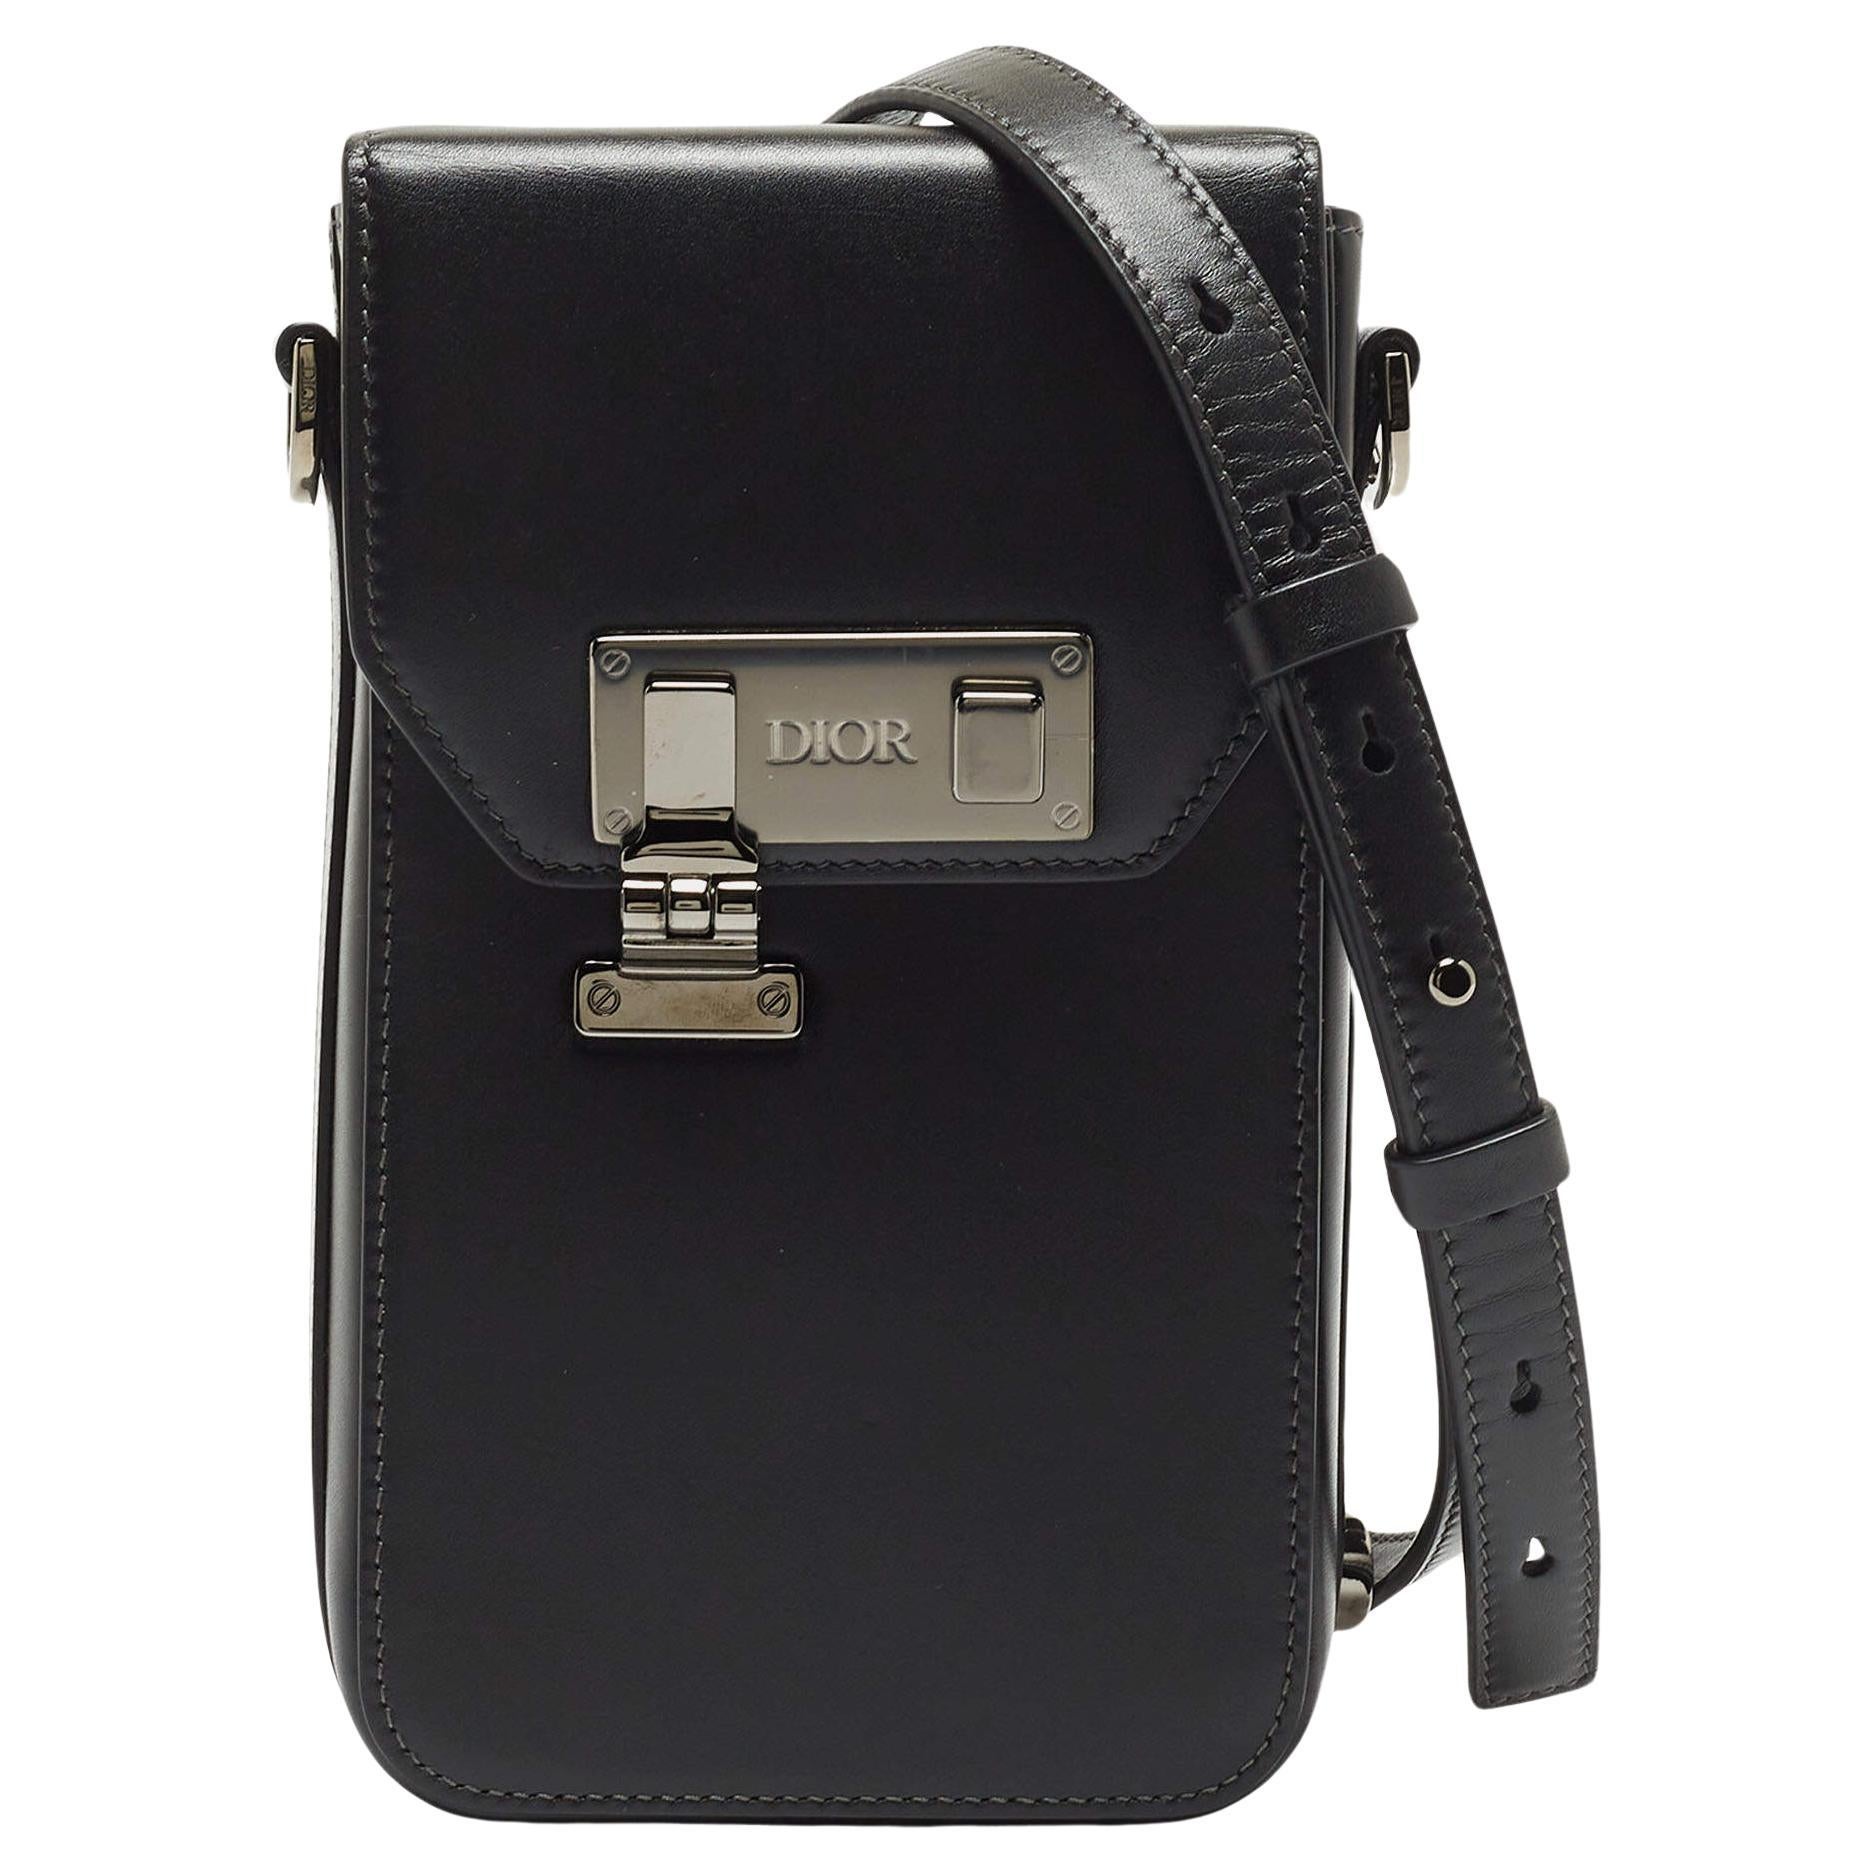 Dior Black Leather Vertical Pouch Bag For Sale